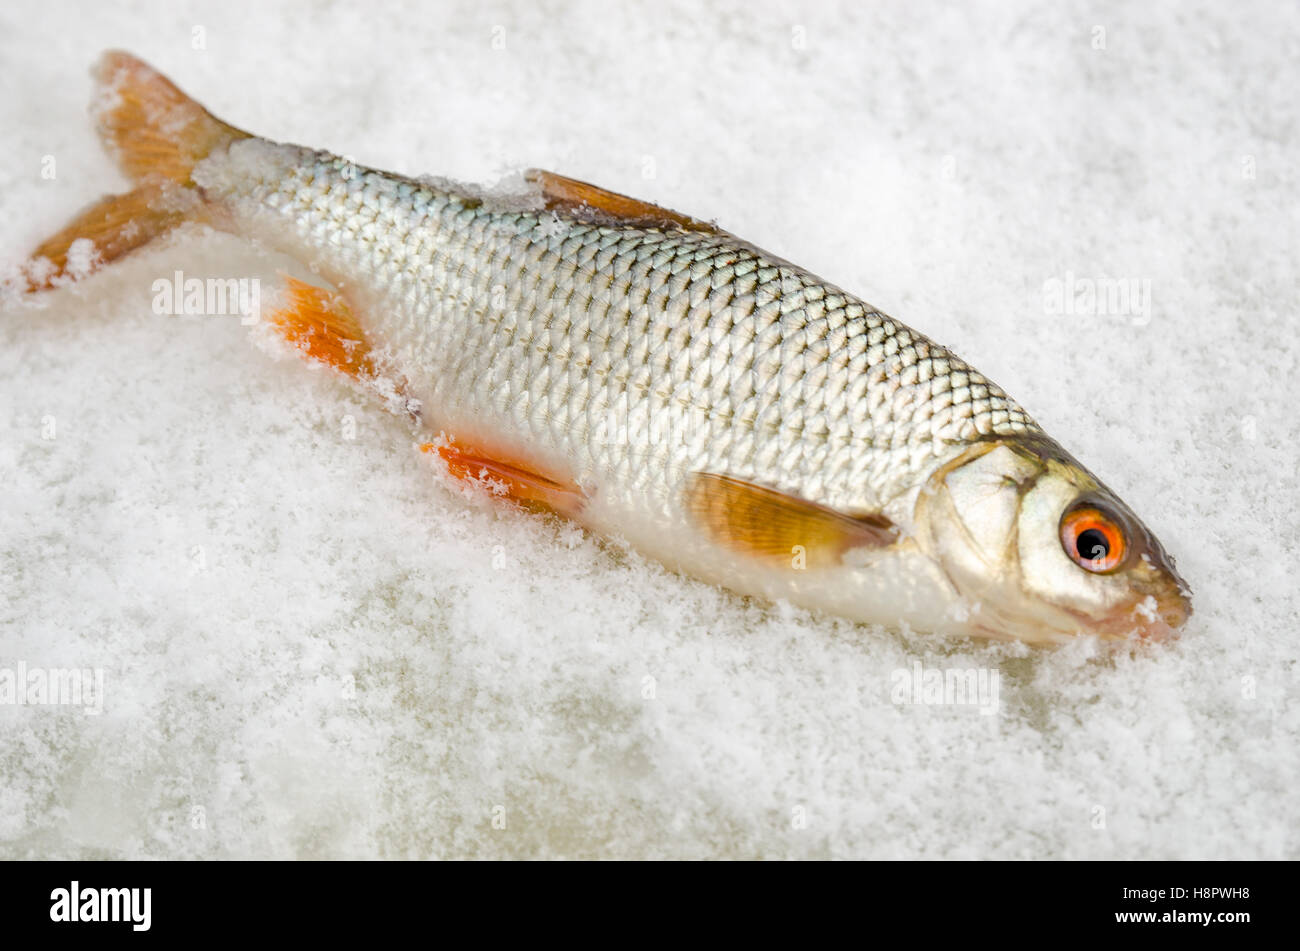 Roach caught by a fisherman lying on the ice close up Stock Photo